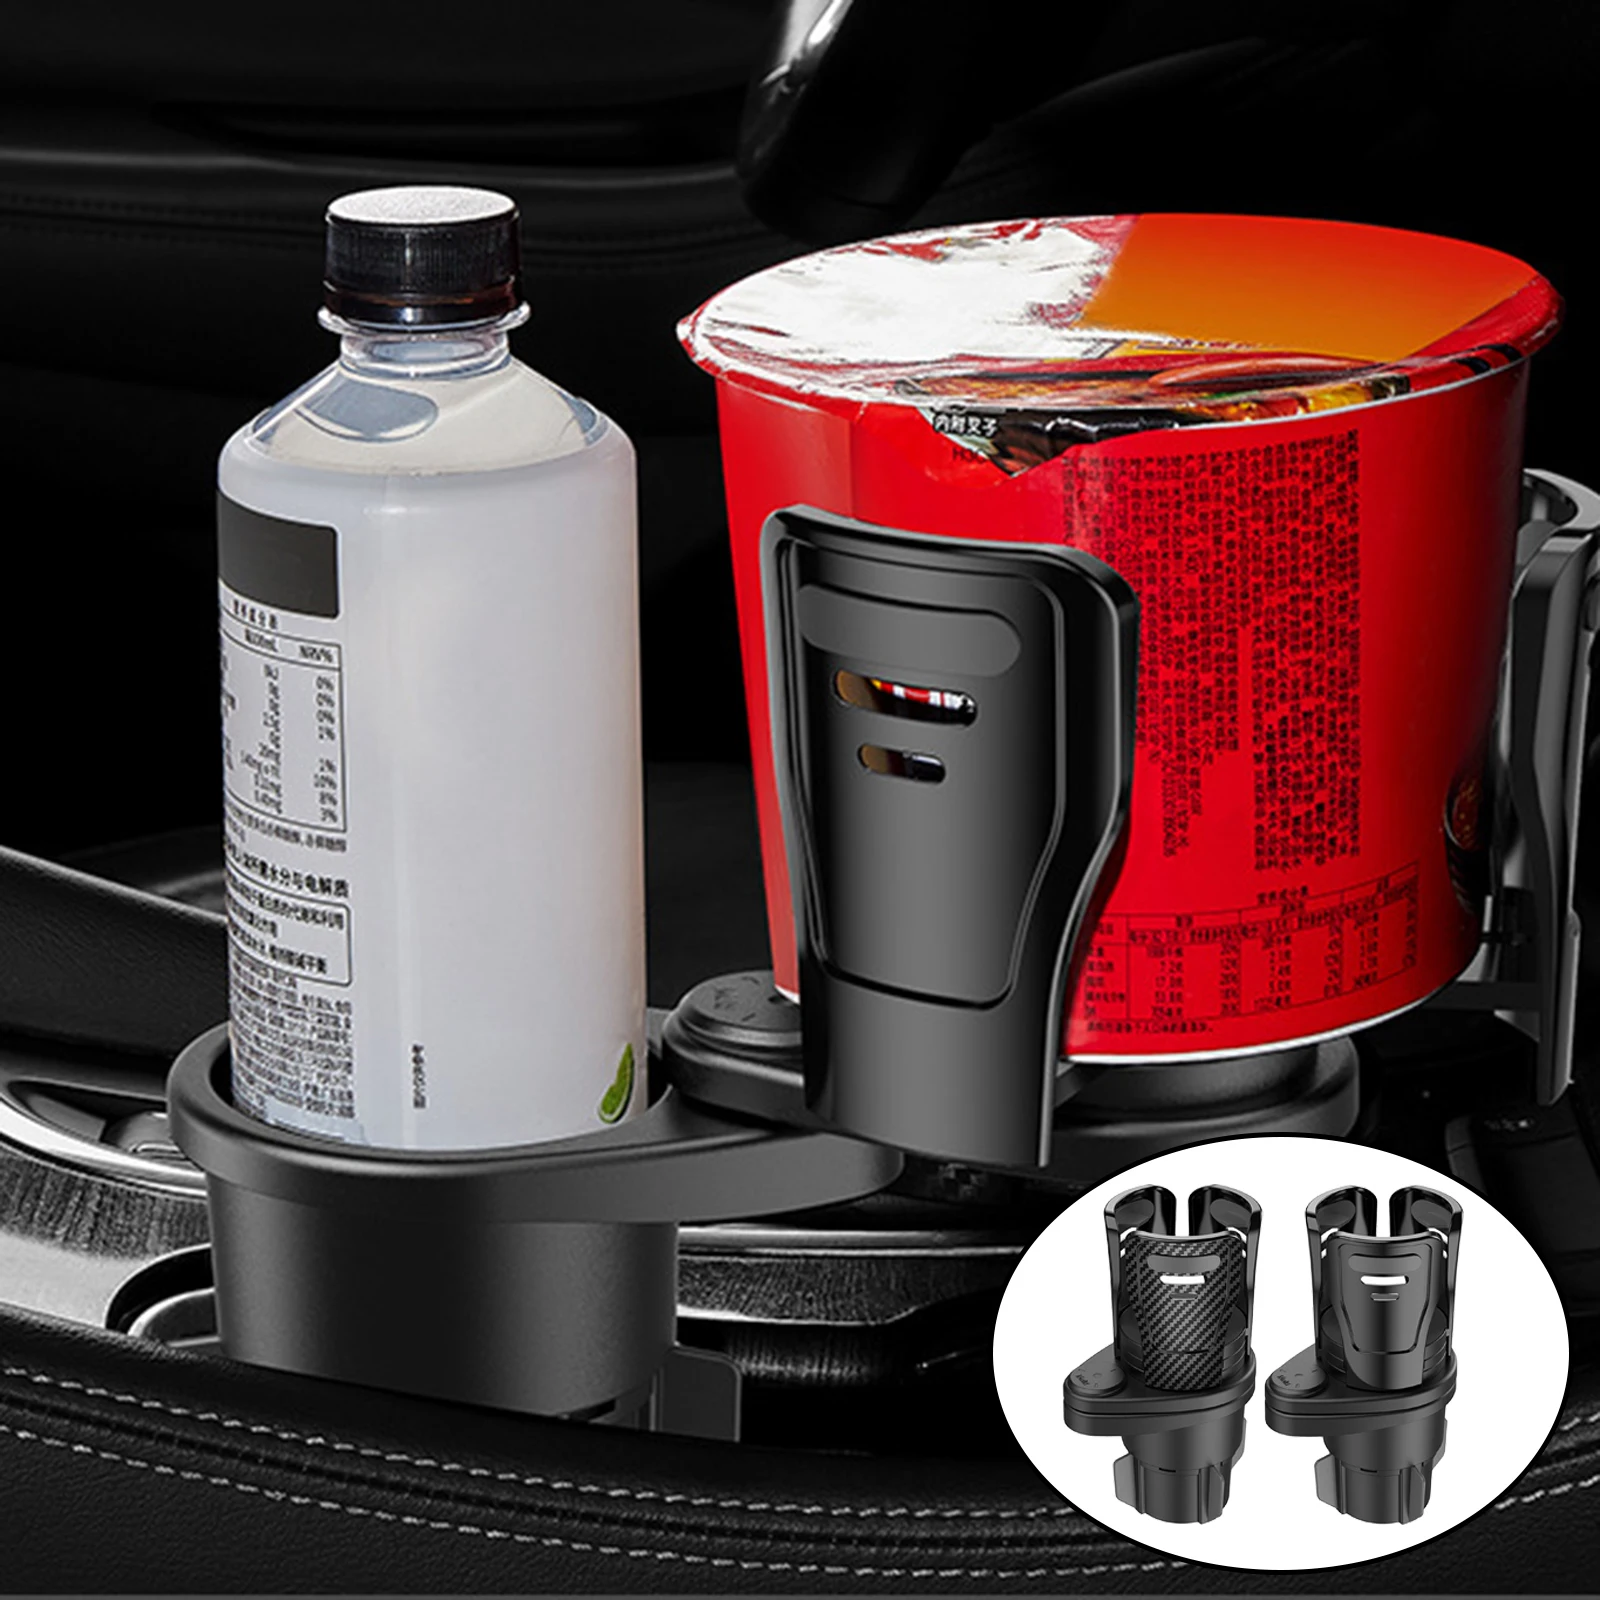 Vehicle-Mounted Car Cup Holder Expander Adjustable Base Automotive Organizers Coffee Drinks Storage Rack Stable for Most Cup